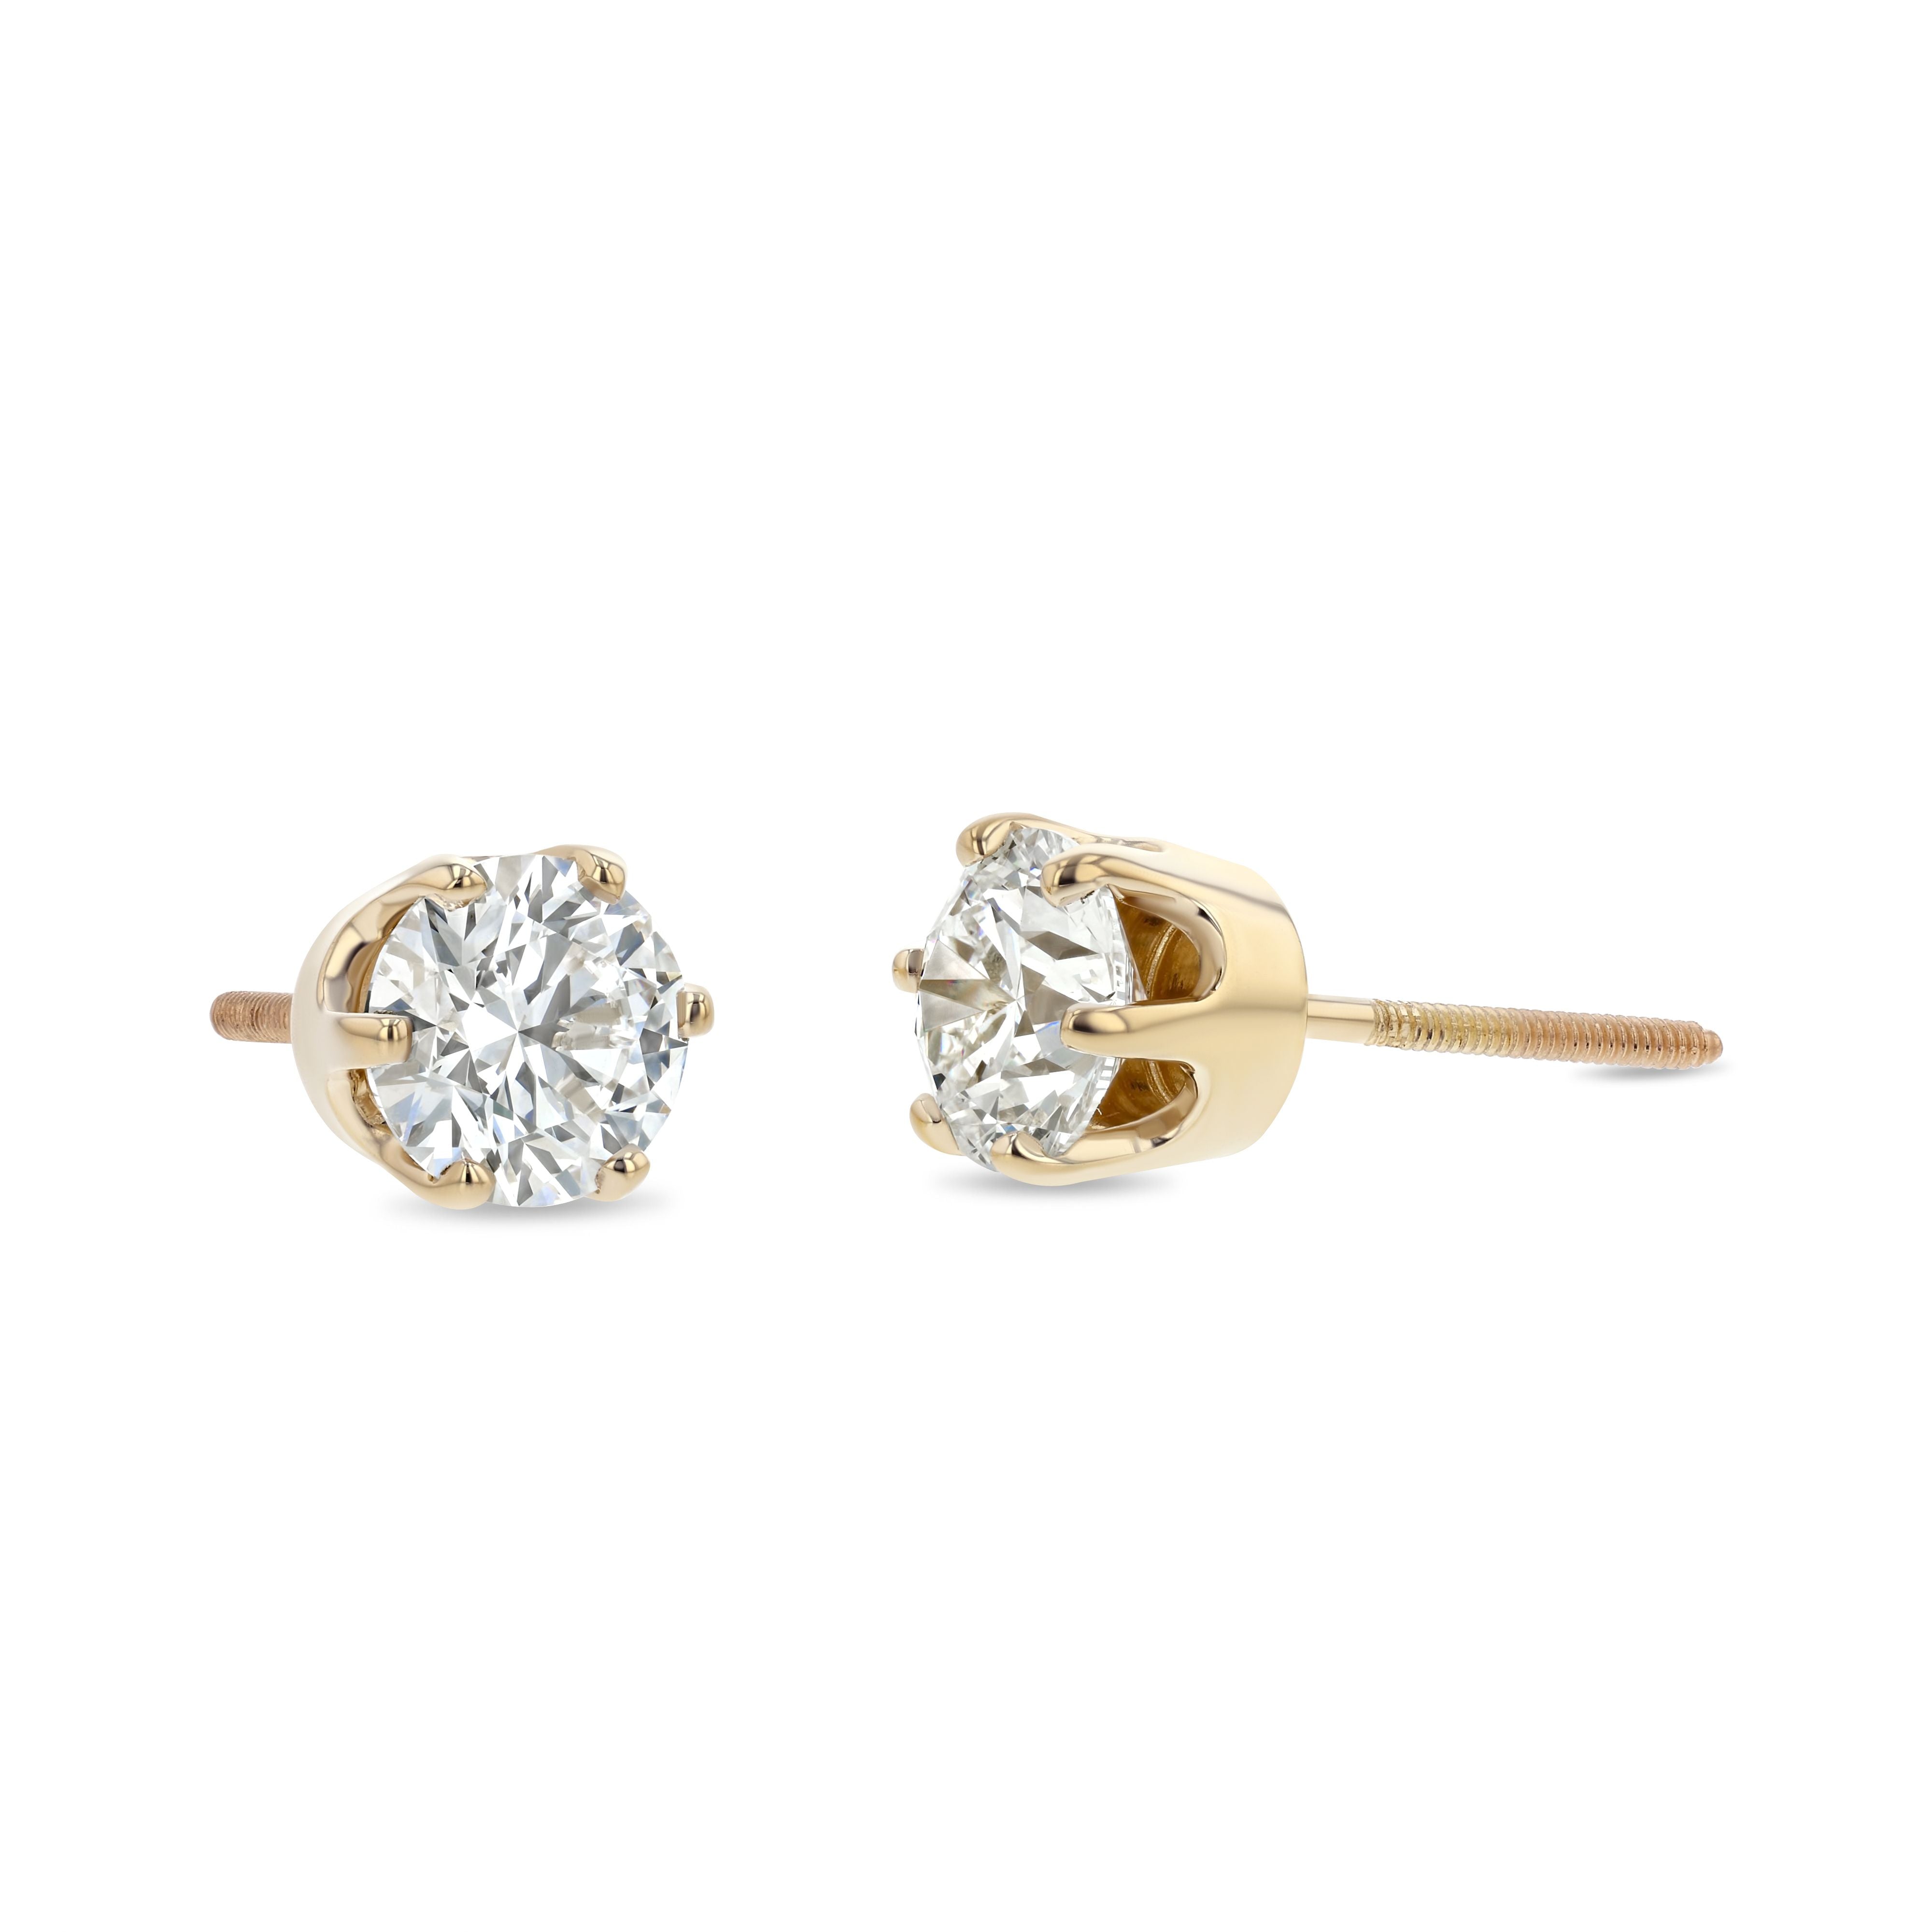 White gold halo diamond earring semi-mounts for 5 mm round stones. —  Vintage Jewelers & Gifts, LLC.